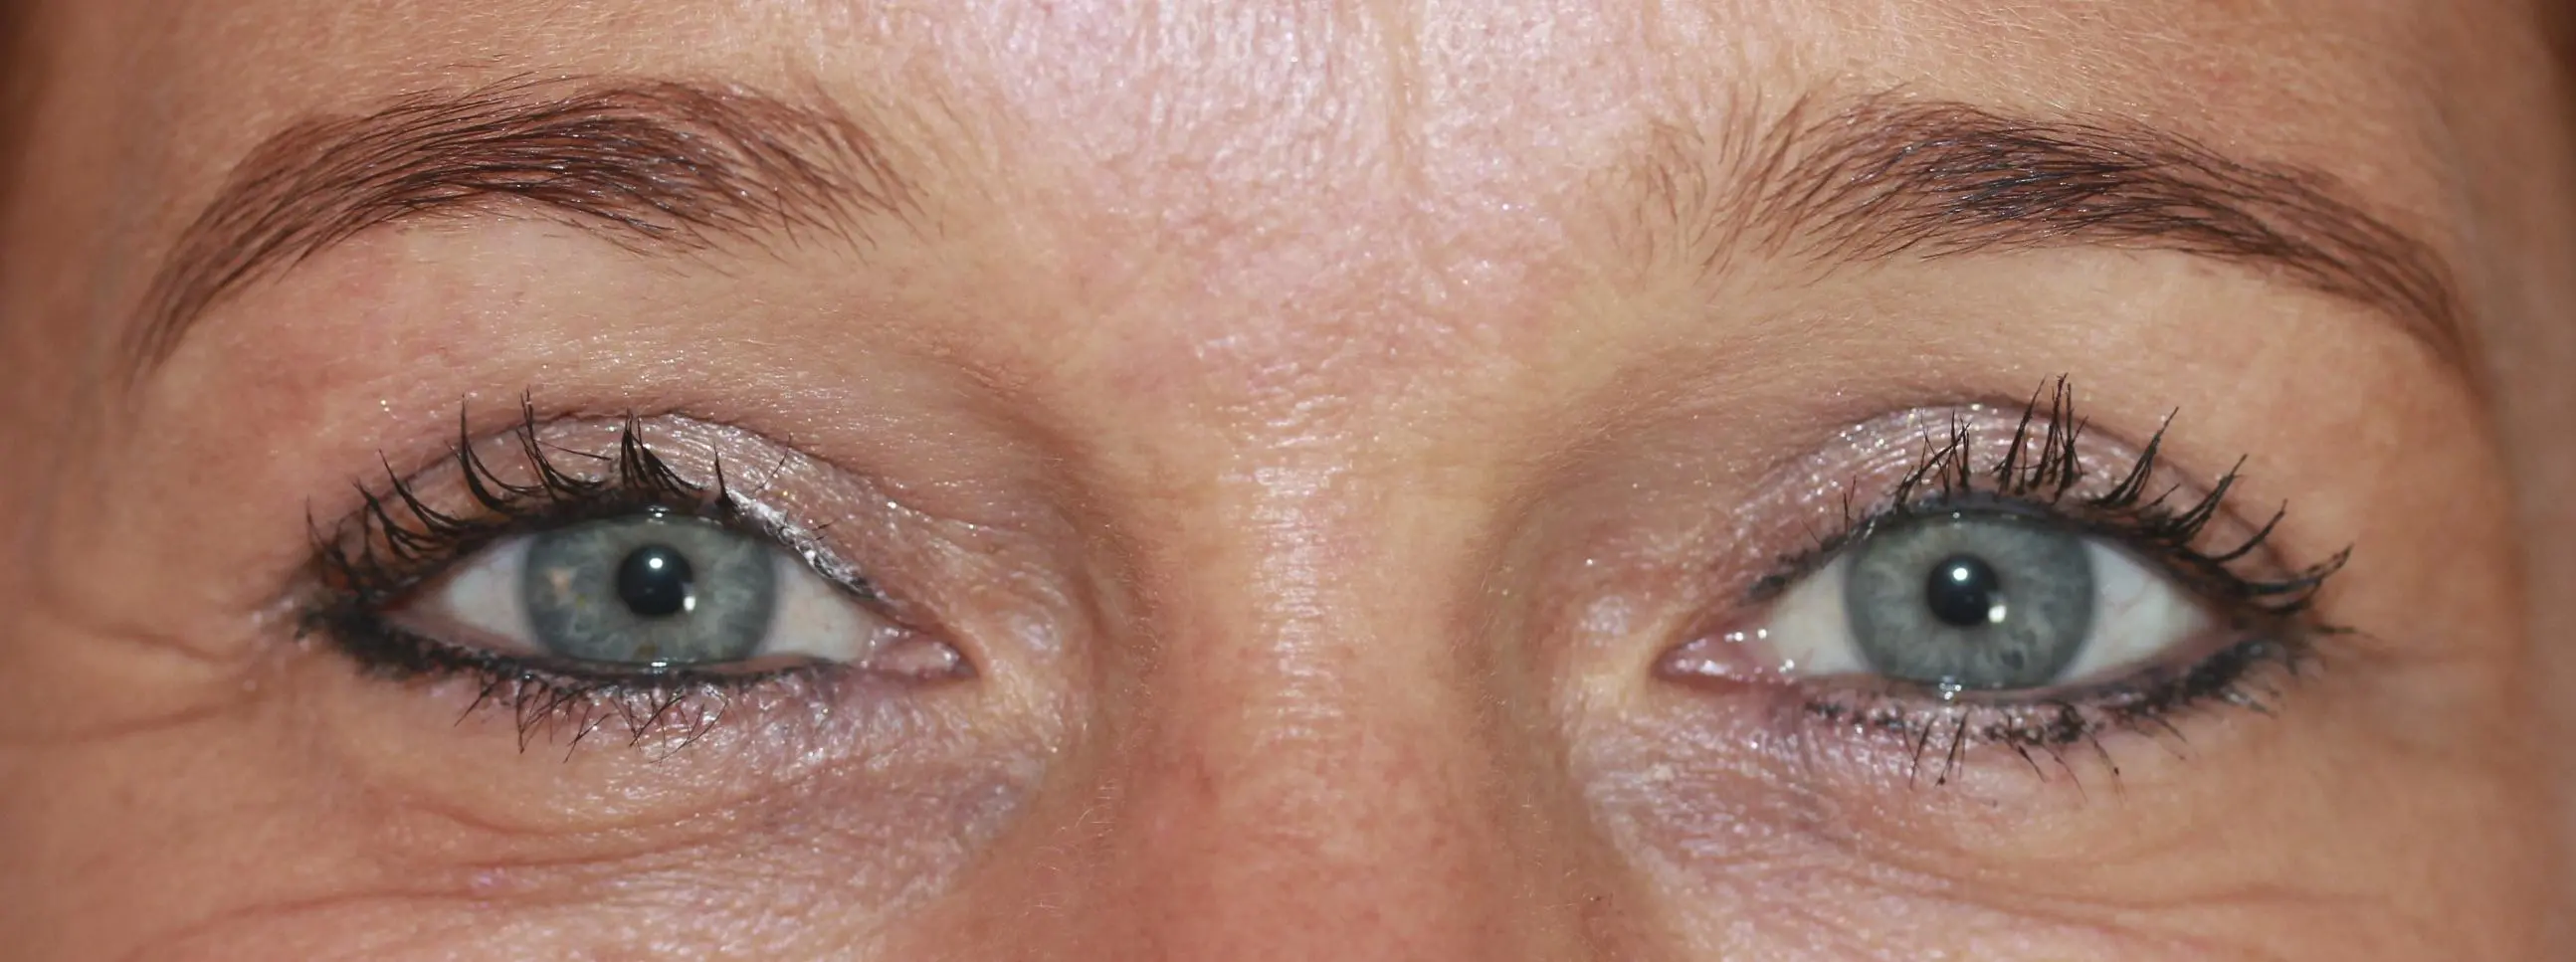 Optisches Augenlifting durch Permanent Make Up